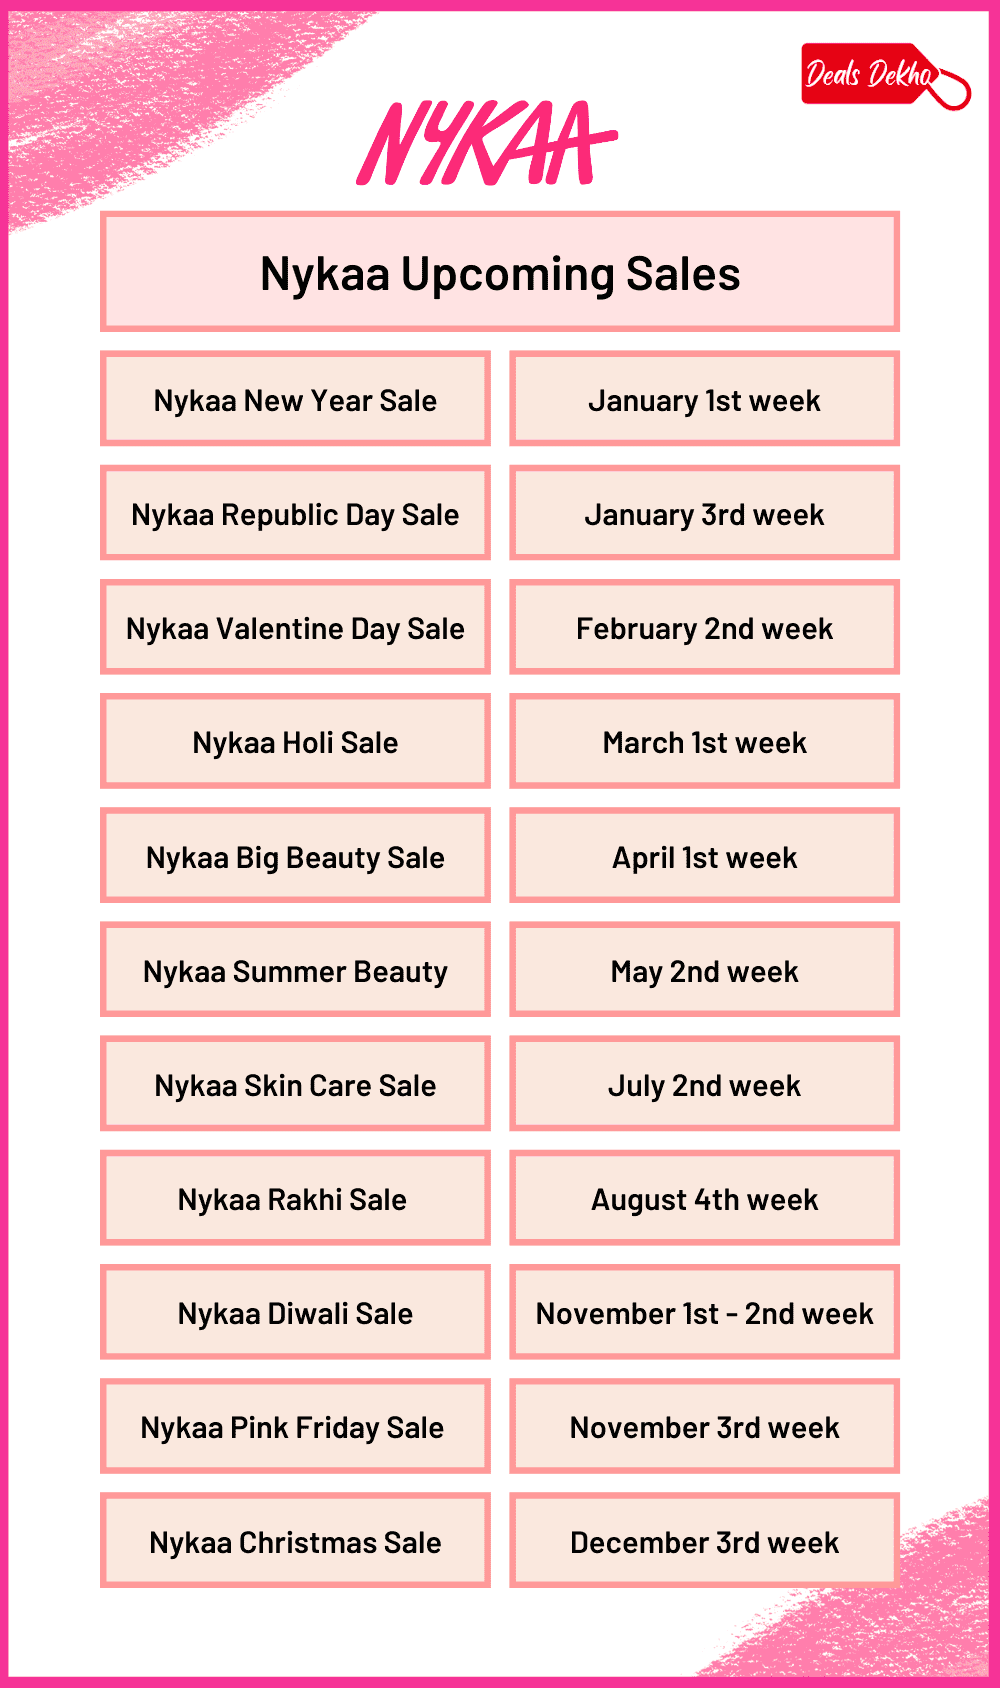 Nykaa Upcoming Sales Date